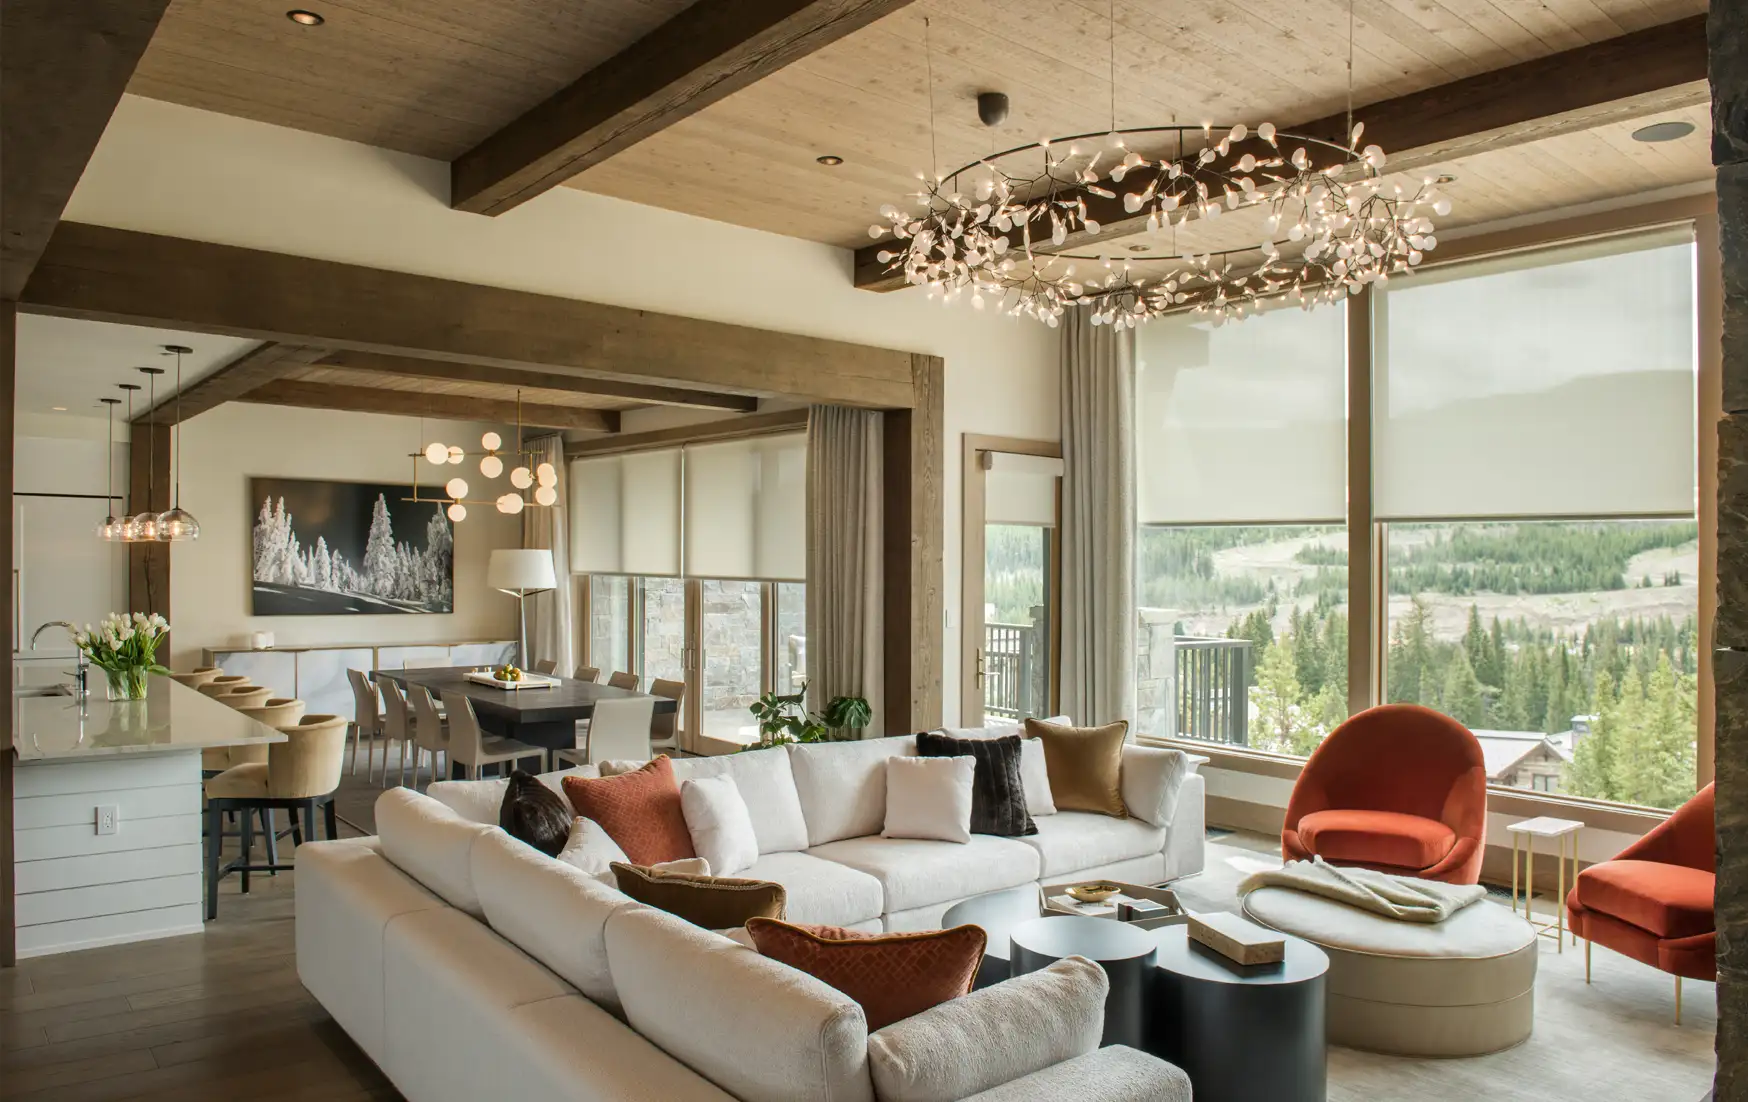 Living room lighting with automated draperies, palladiom roller shades, and decorative lighting